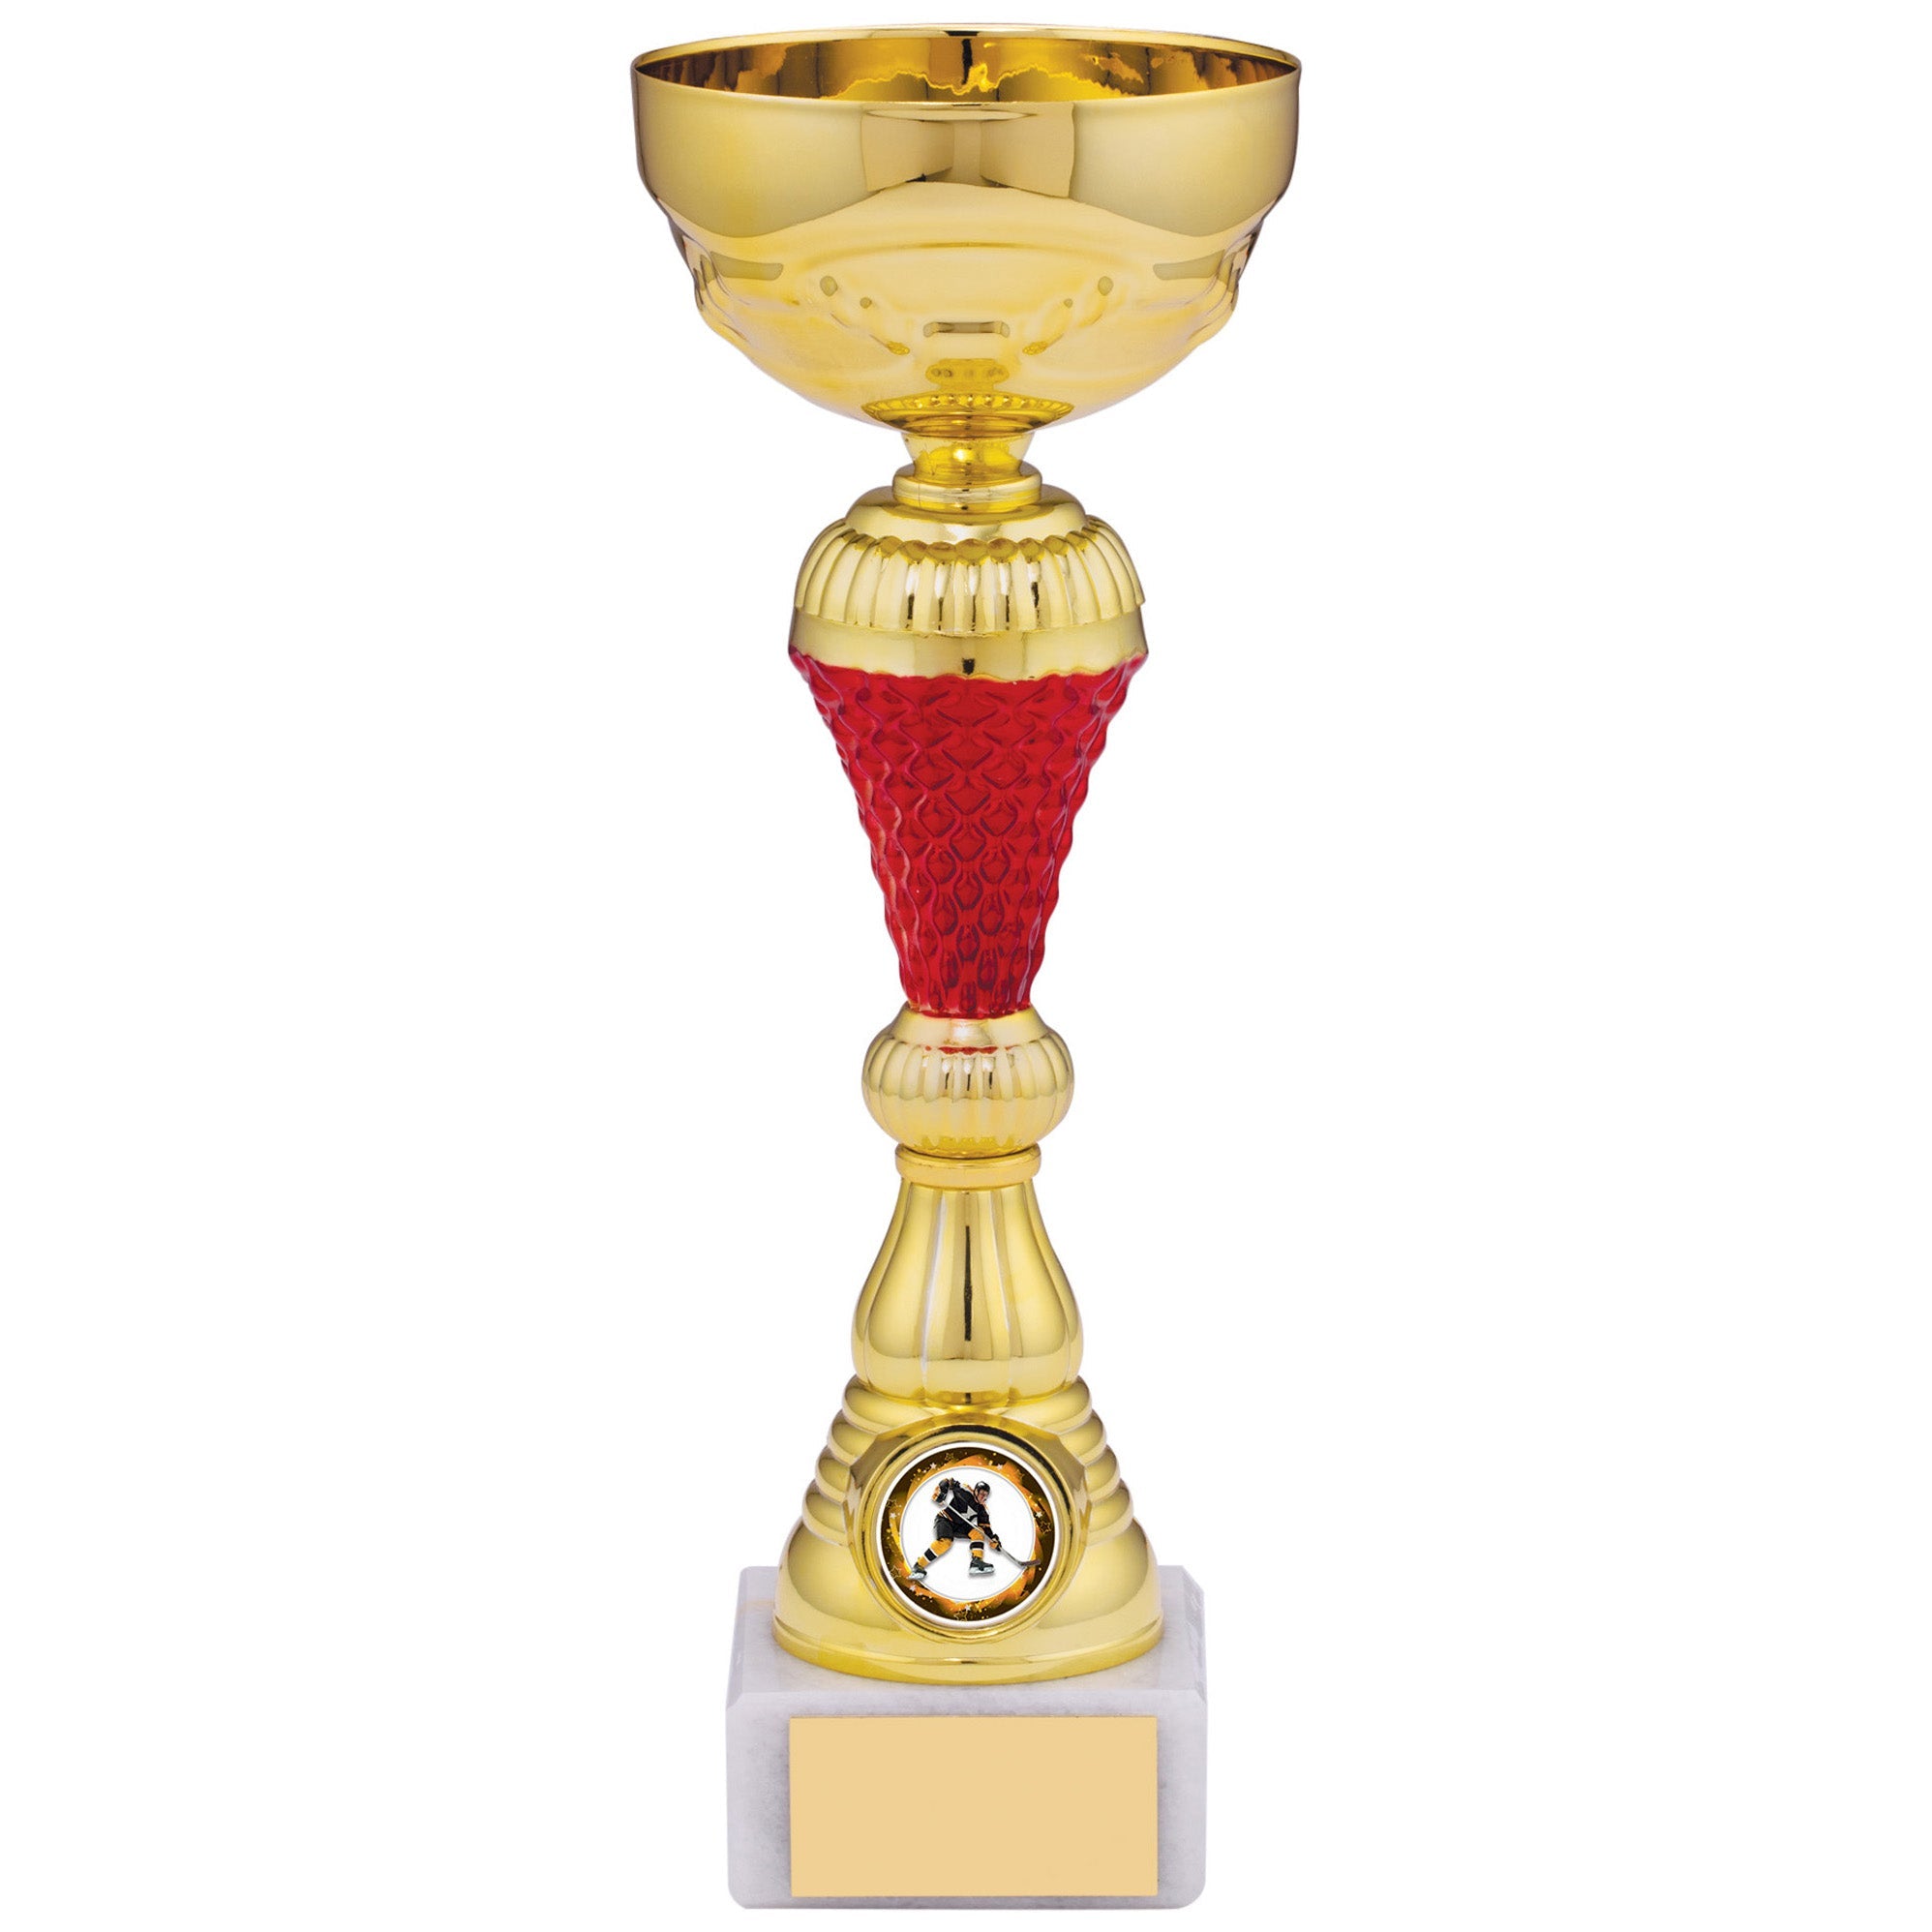 Gold Trophy Cup with Red Stem on Marble Base